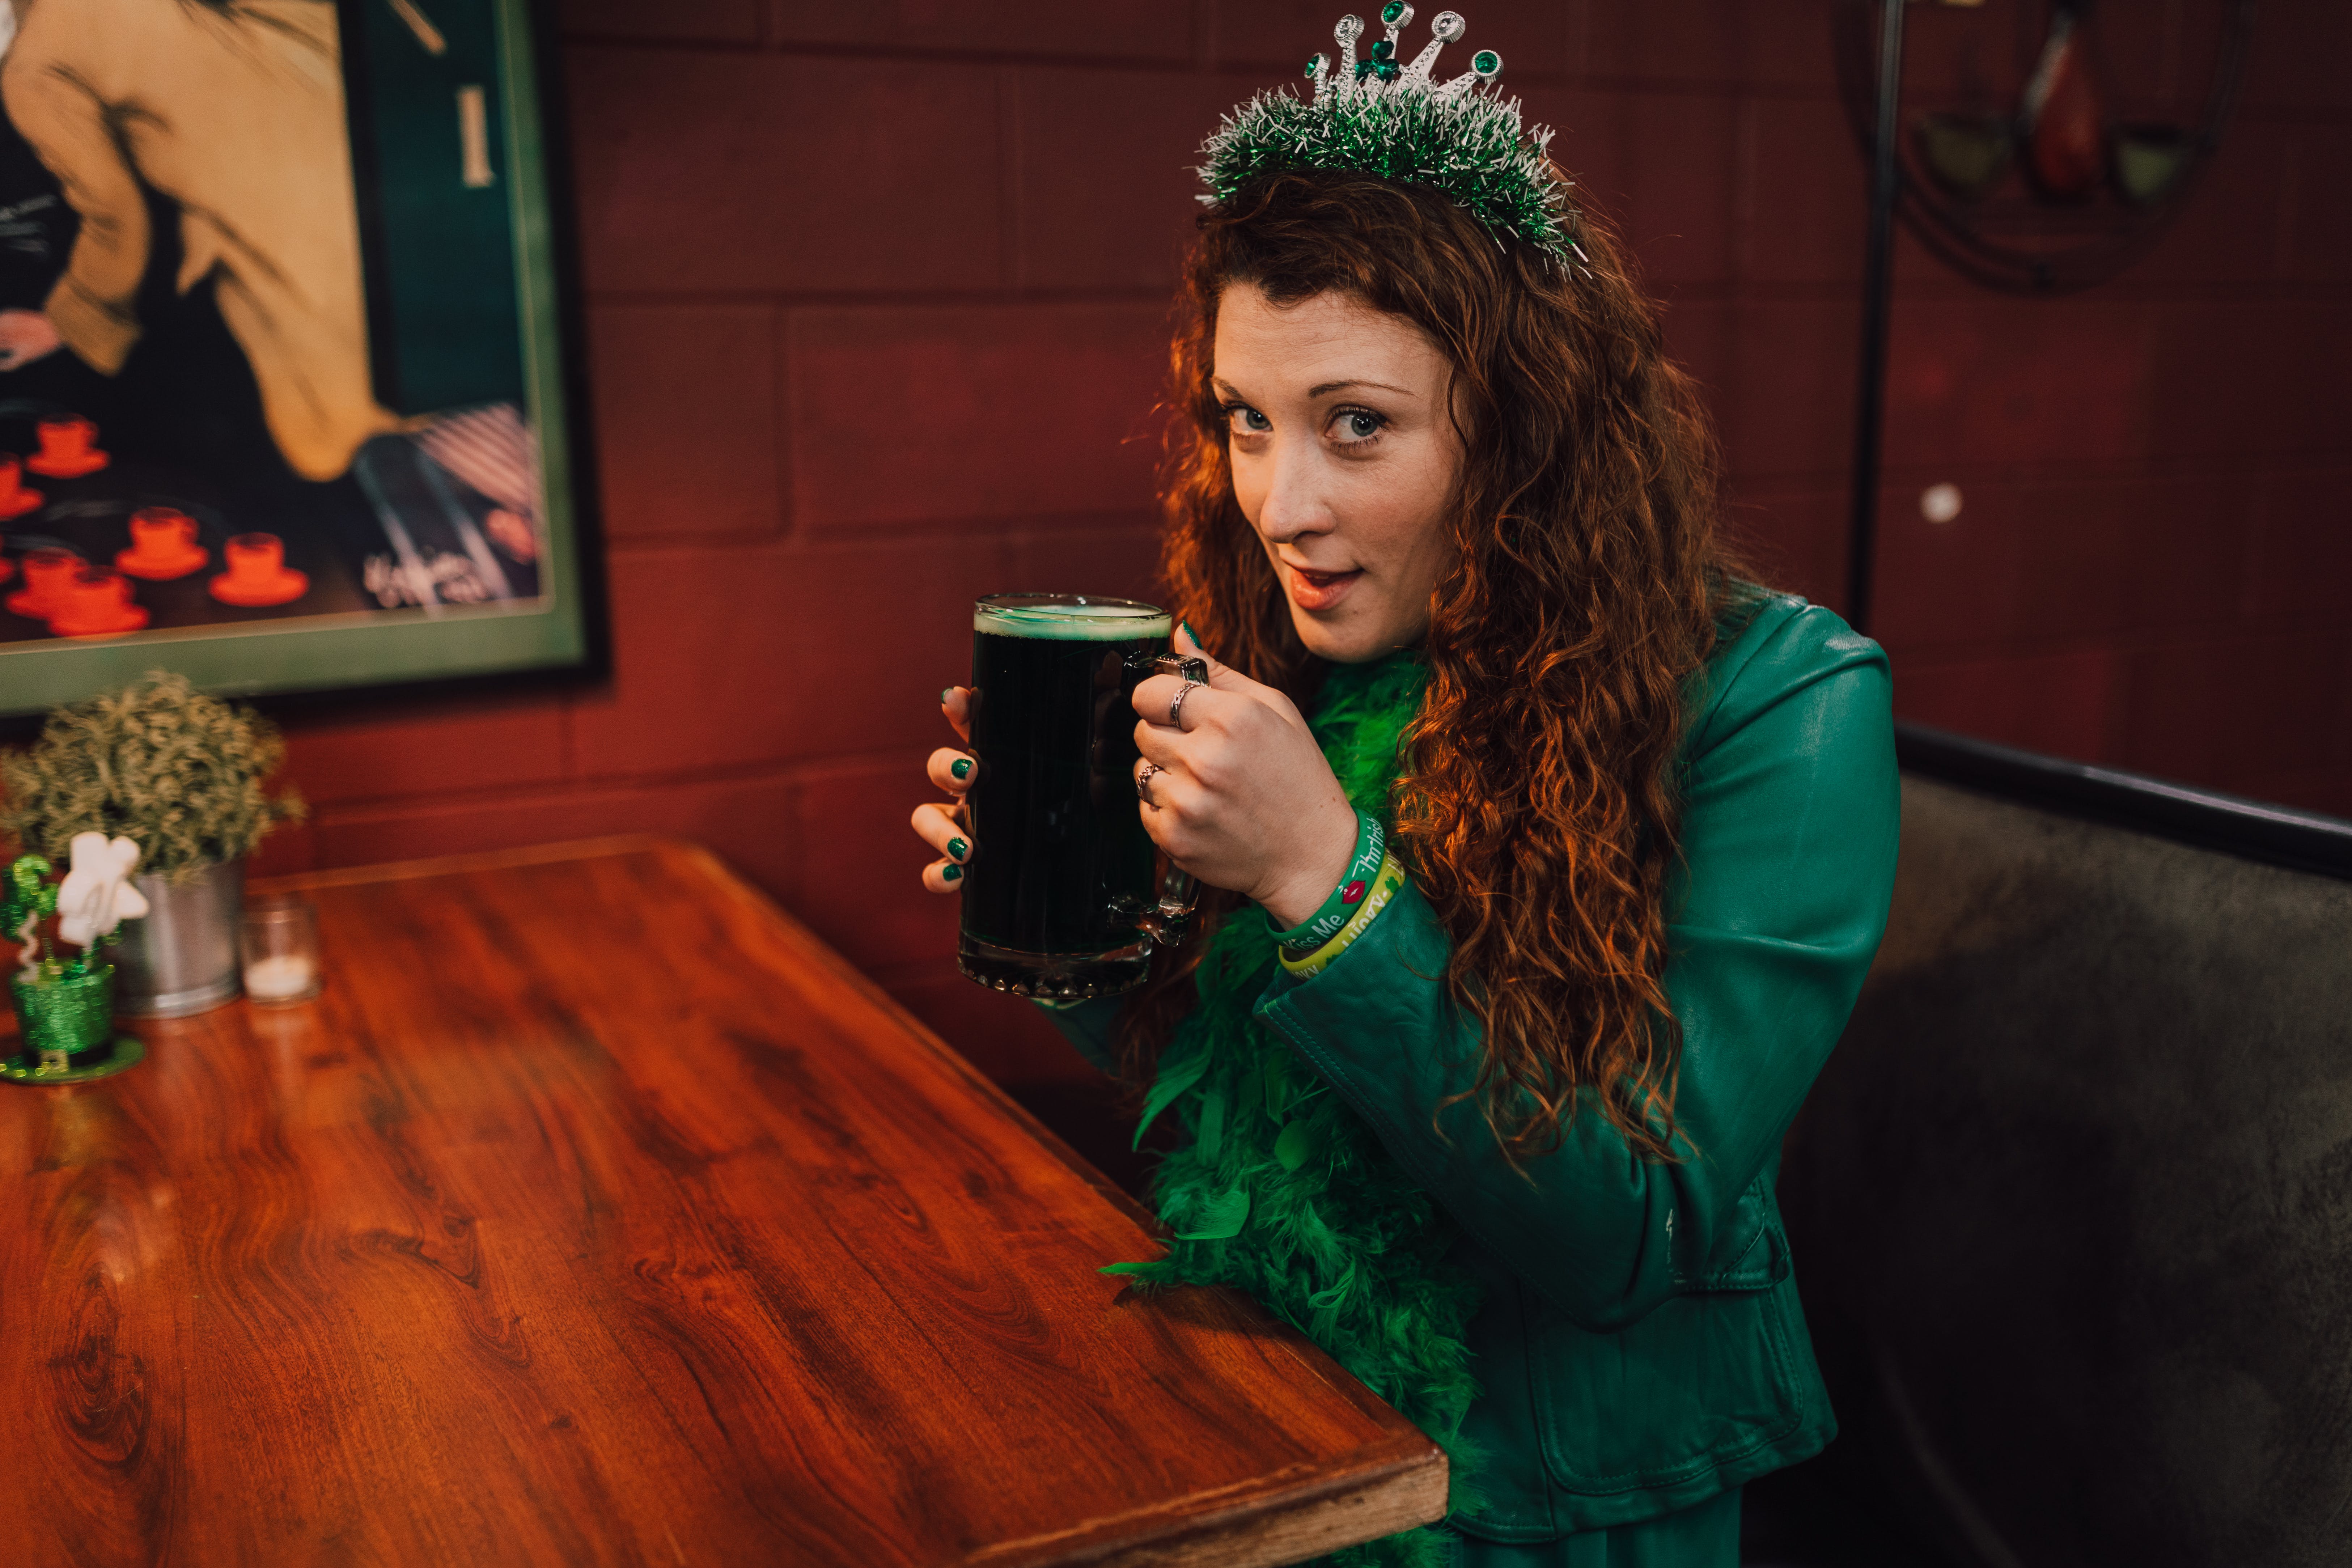 curly haired woman in a green St. Patrick's Day inspired outfit holding a beer mug